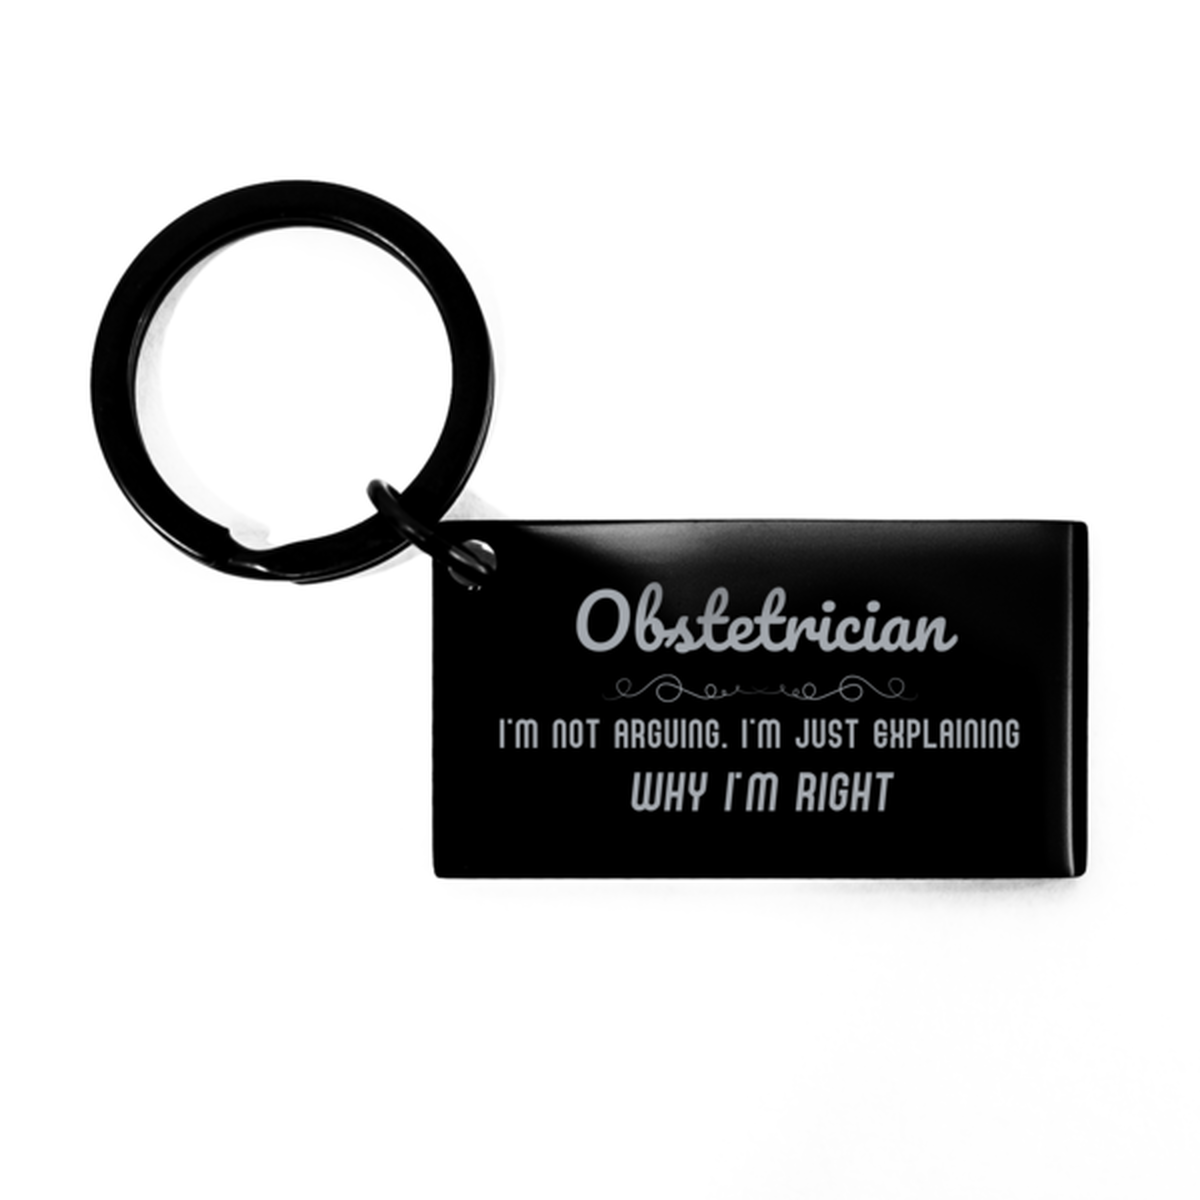 Obstetrician I'm not Arguing. I'm Just Explaining Why I'm RIGHT Keychain, Funny Saying Quote Obstetrician Gifts For Obstetrician Graduation Birthday Christmas Gifts for Men Women Coworker